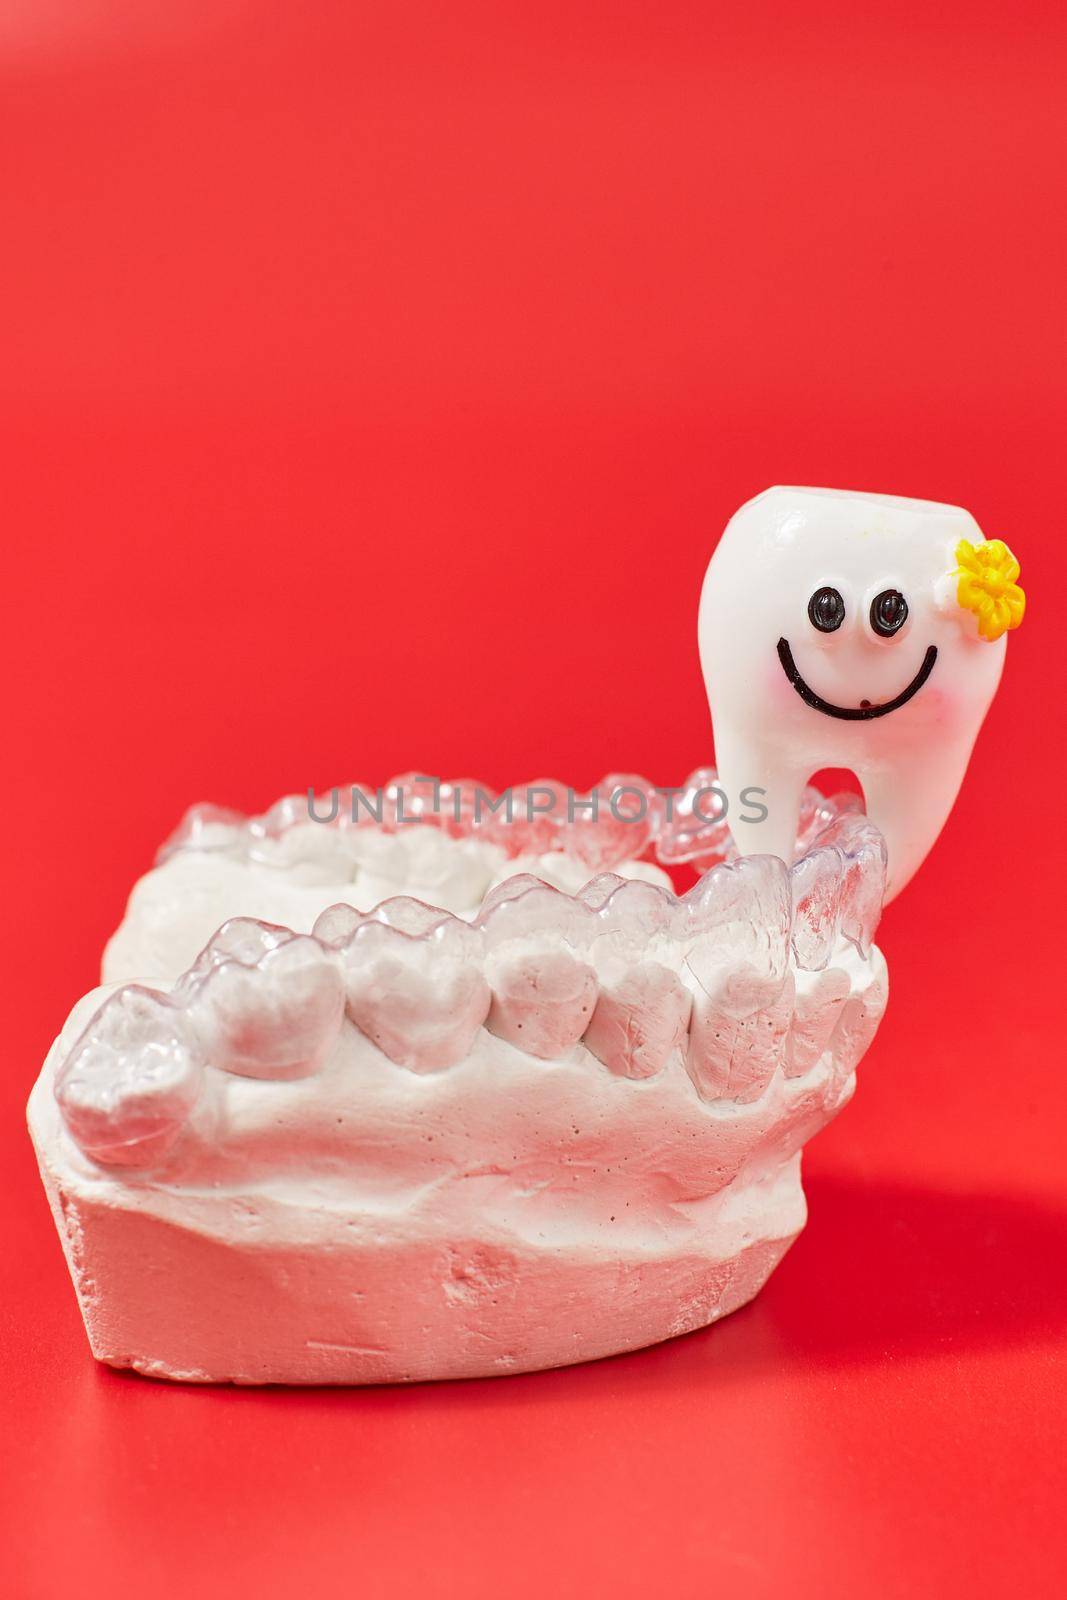 Joyful tooth on a red background in invisible dental aligners or braces aplicable for an orthodontic dental treatment